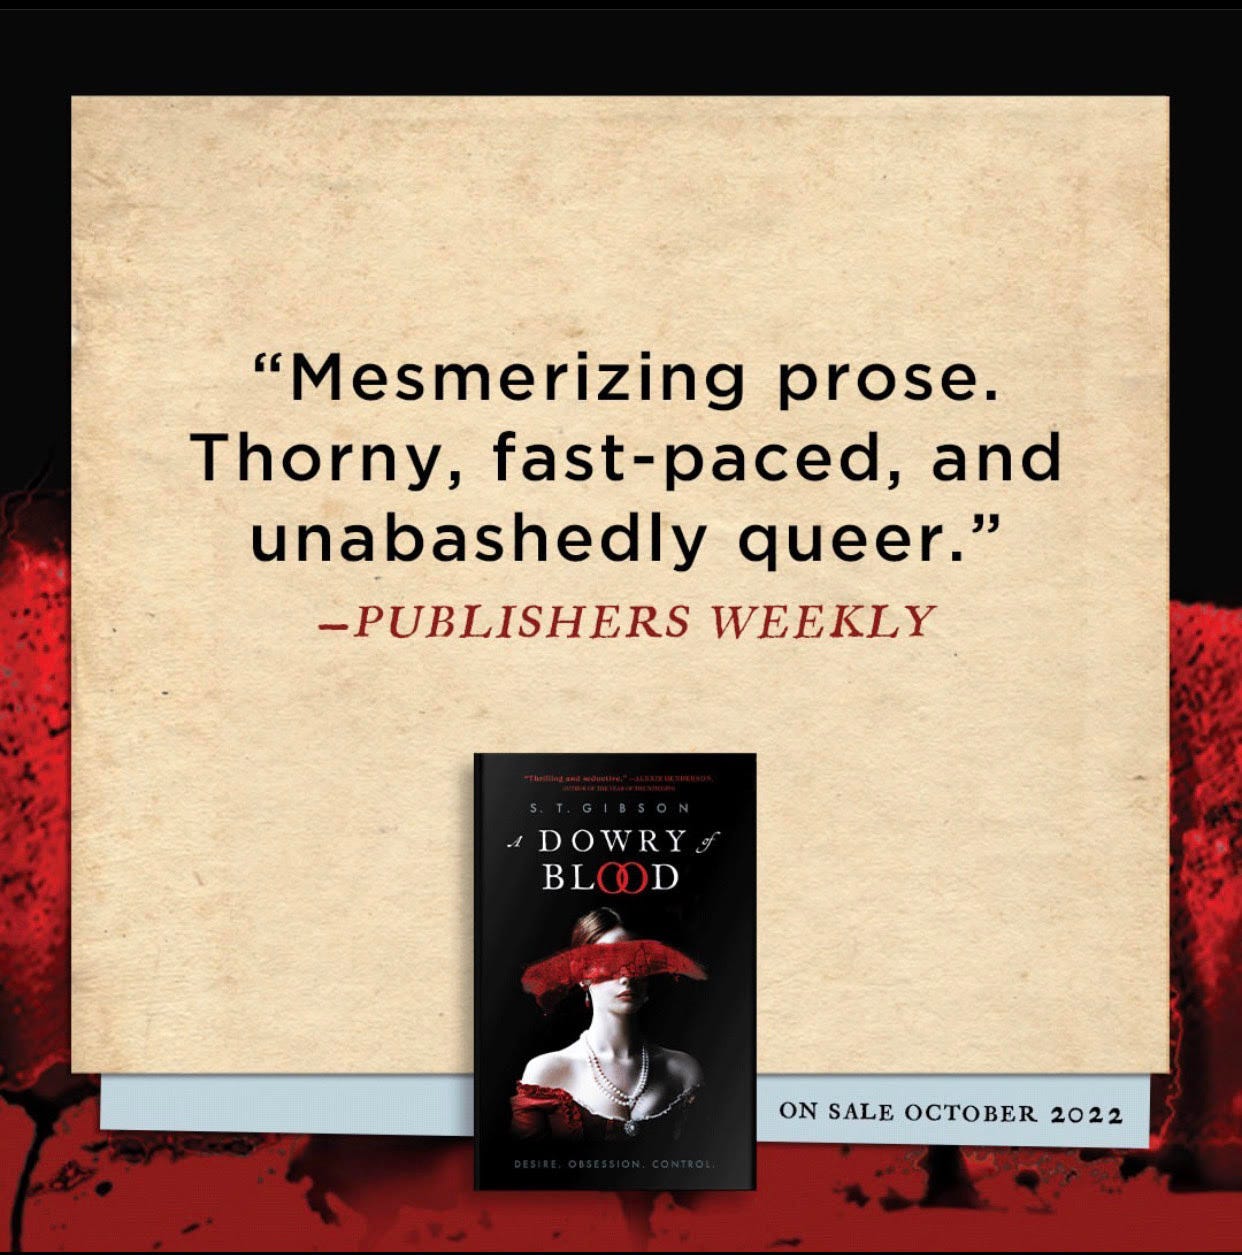 a Publisher's Weekly review, calling A DOWRY OF BLOOD "thorny, fast-paced, and unabashedly queer."